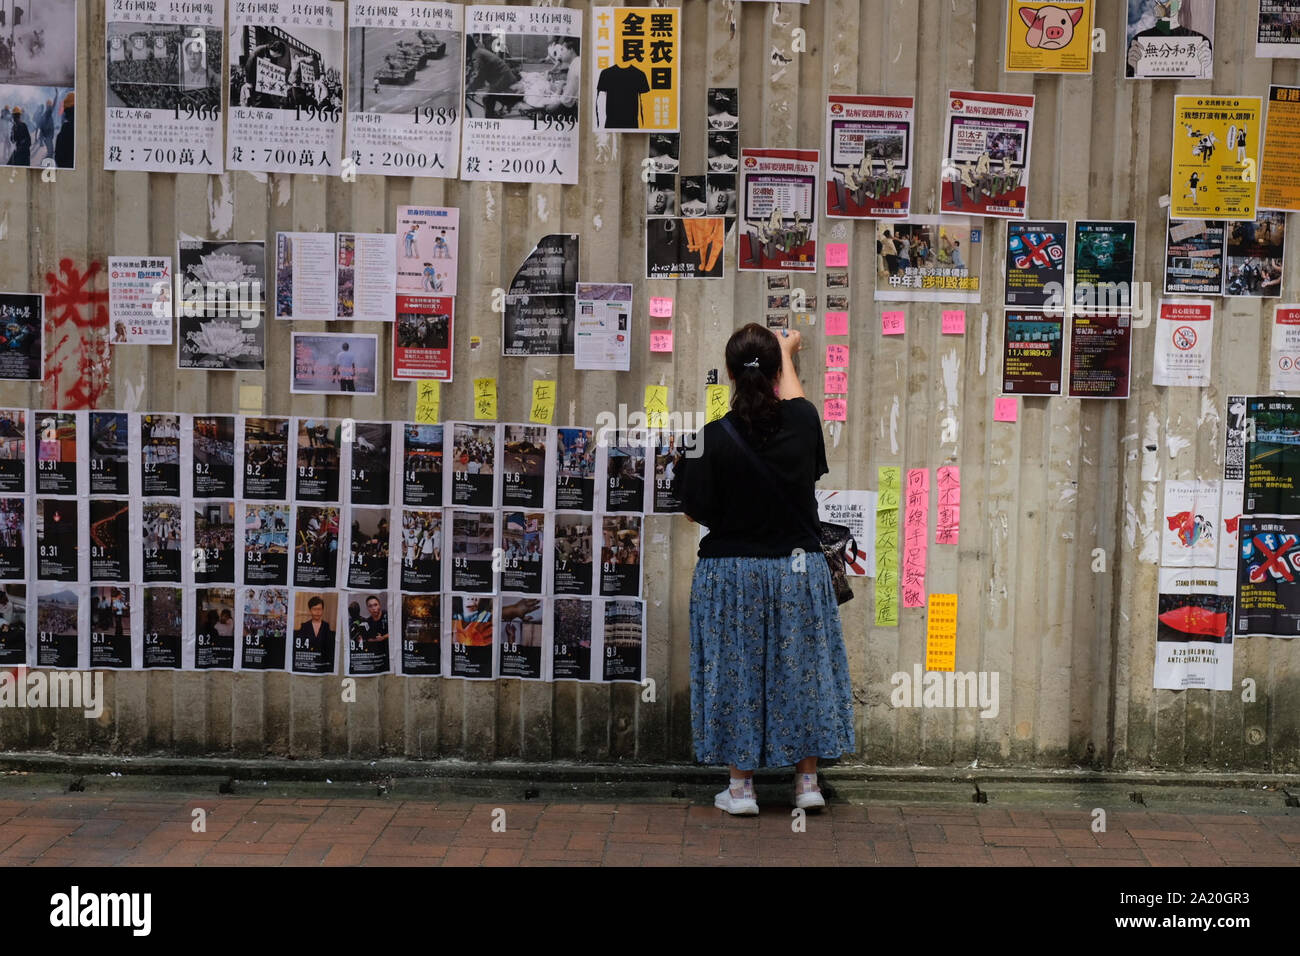 Posters and messages covering the walls and pavements in Kowloon, Hong Kong, where authorities have rejected an appeal for a major pro-democracy march on China's National Day holiday, following two straight days of violent clashes between protesters and police. Stock Photo